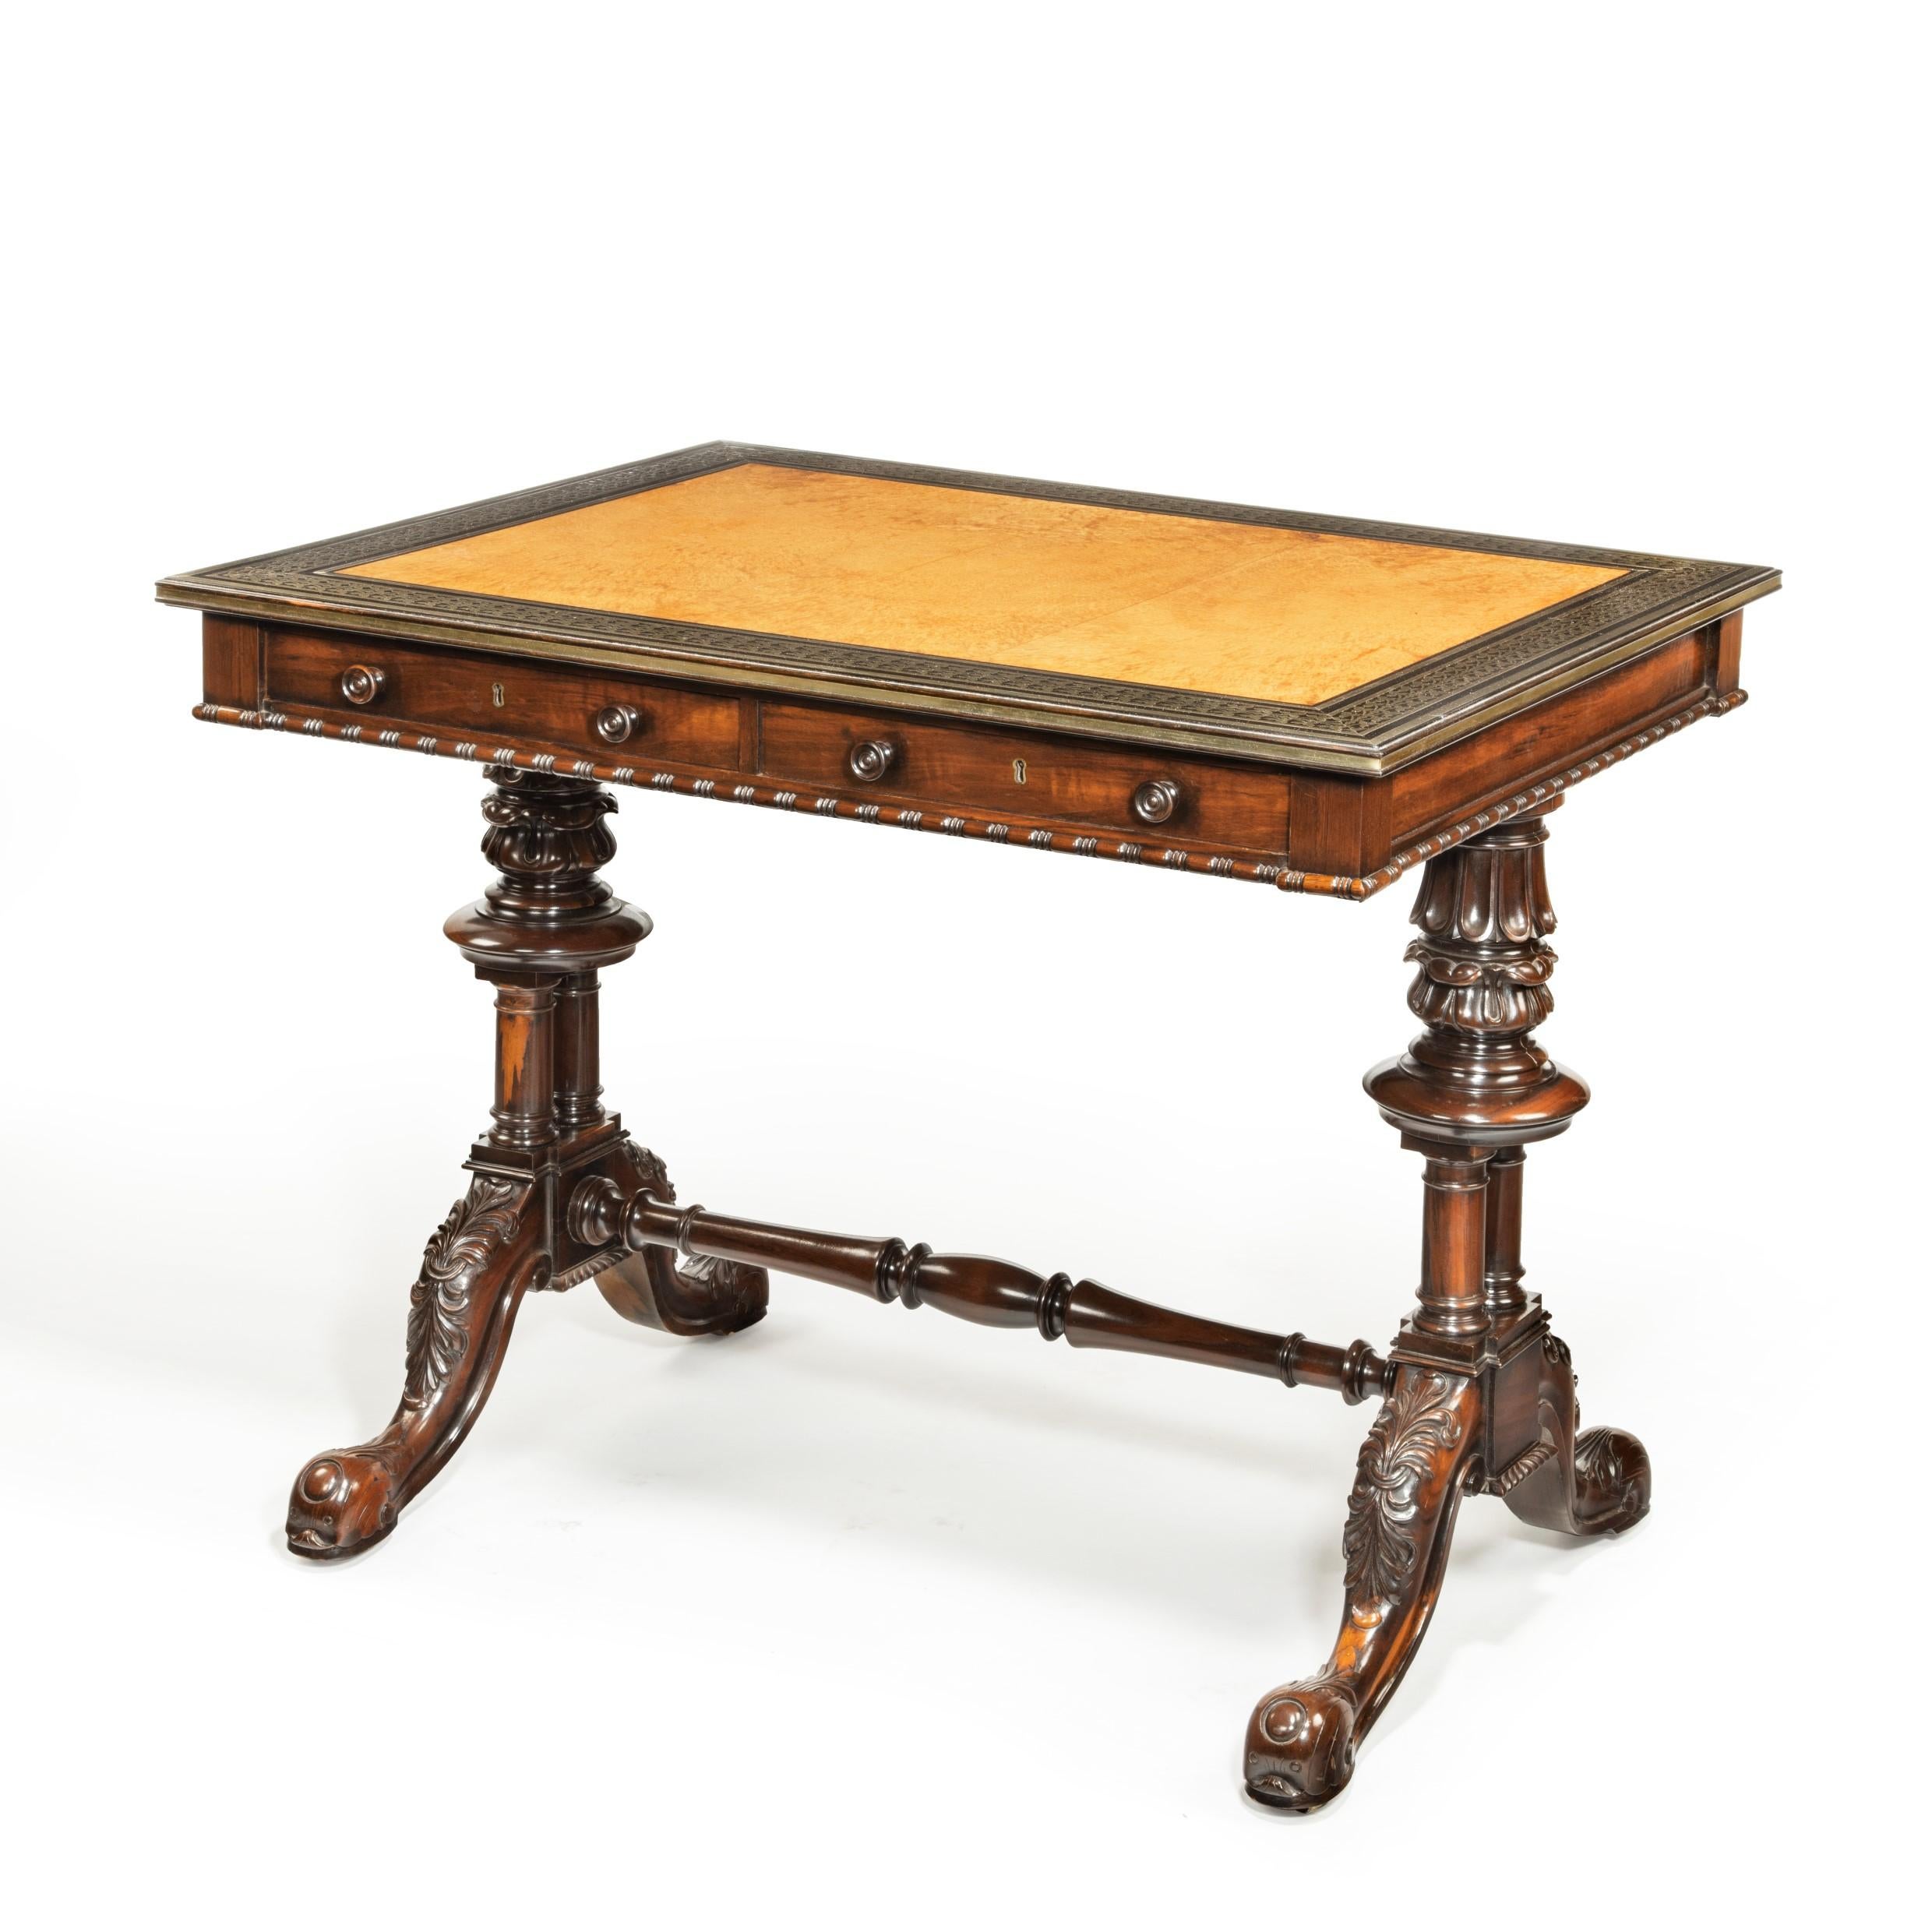 Striking Goncalo Alves 'Albuera Wood' Writing Table Attributed to Gillows 1